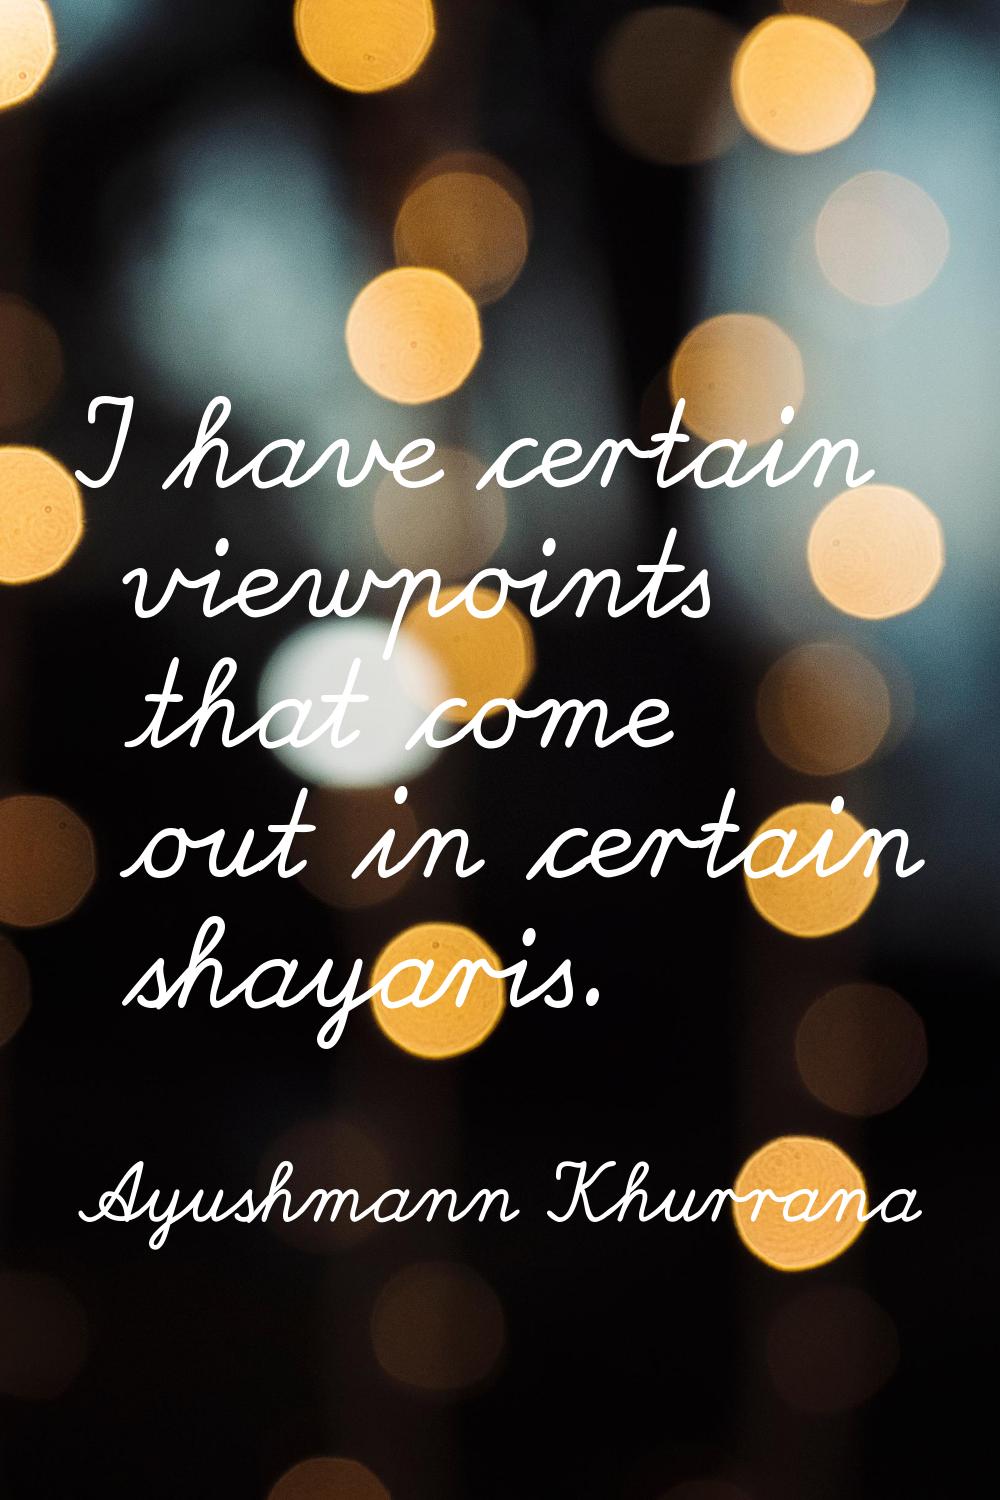 I have certain viewpoints that come out in certain shayaris.